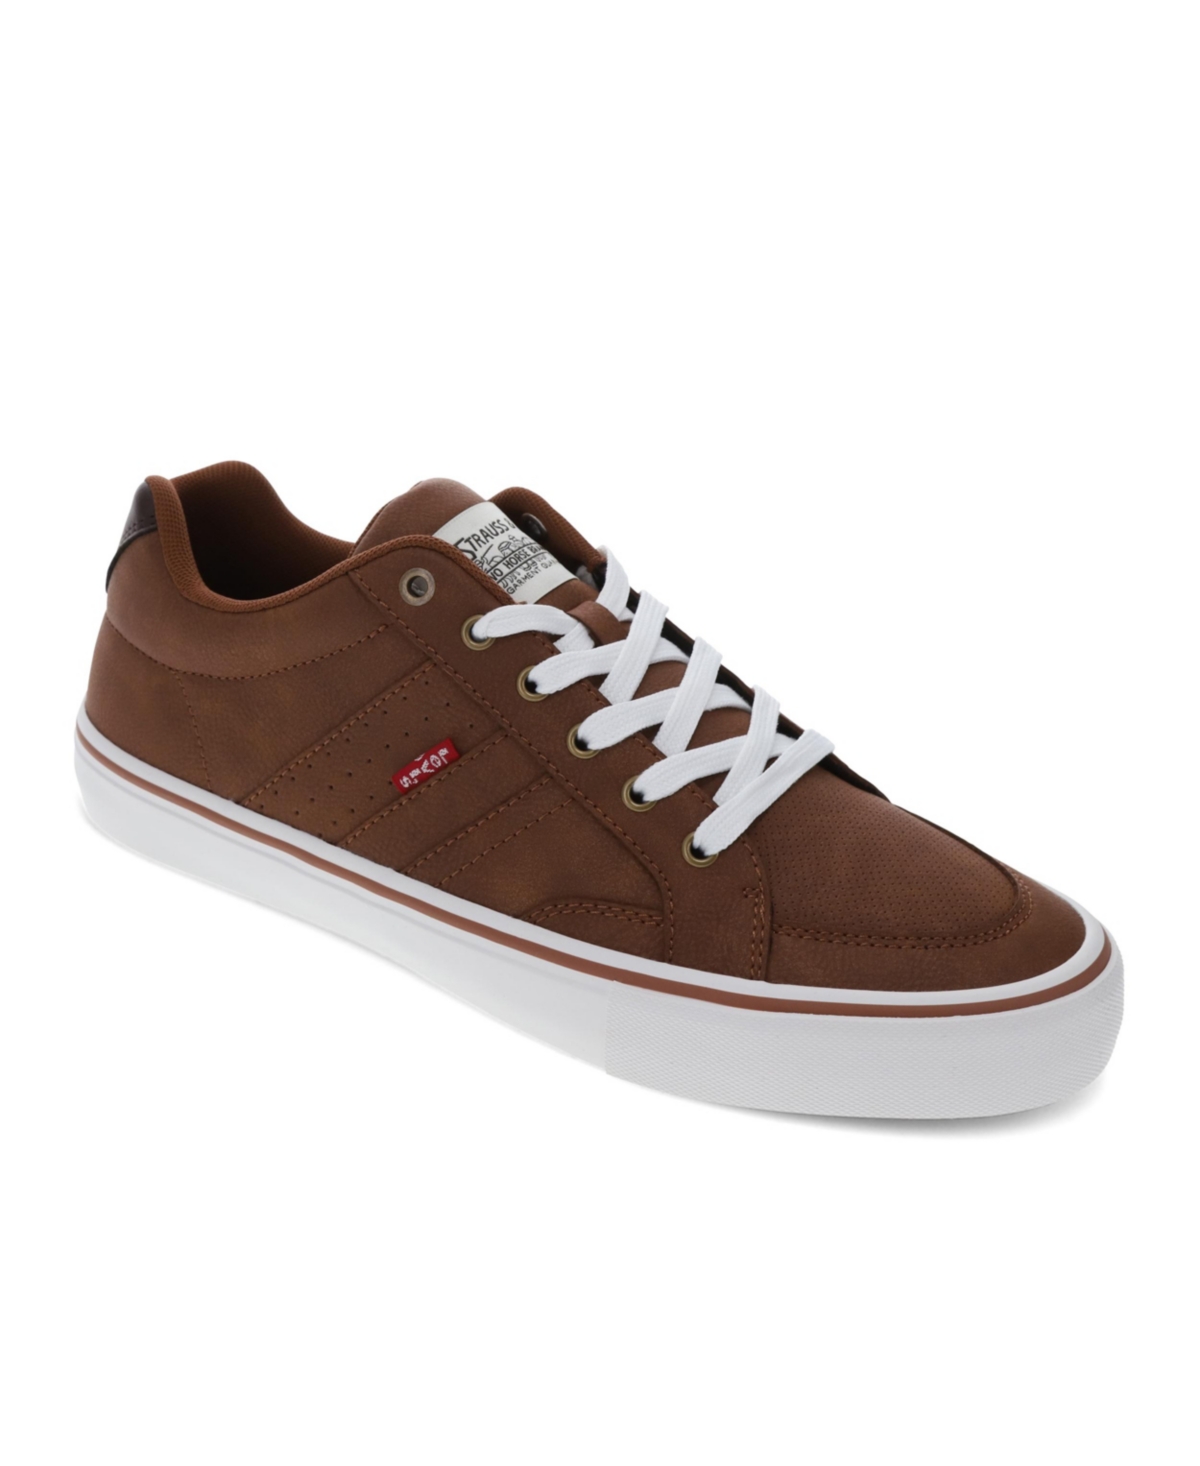 Shop Levi's Men's Avery Fashion Athletic Comfort Sneakers In Tan,brown